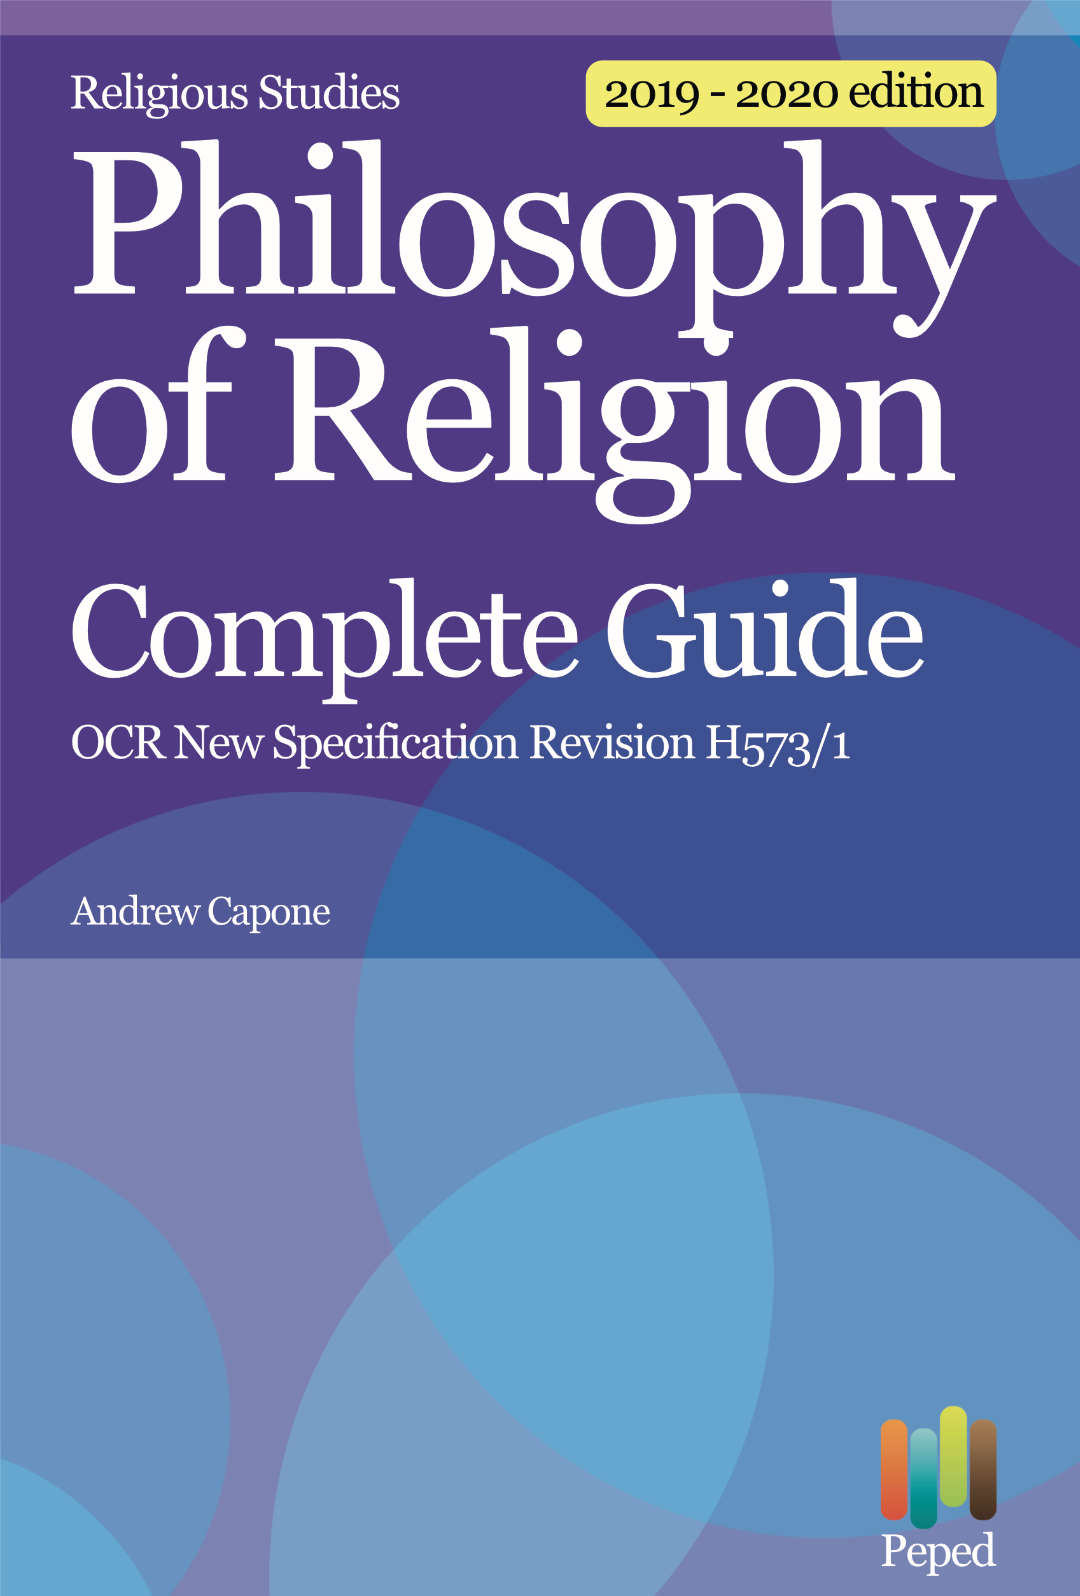 Religious Studies Philosophy of Religion OCR Revision Complete Guide